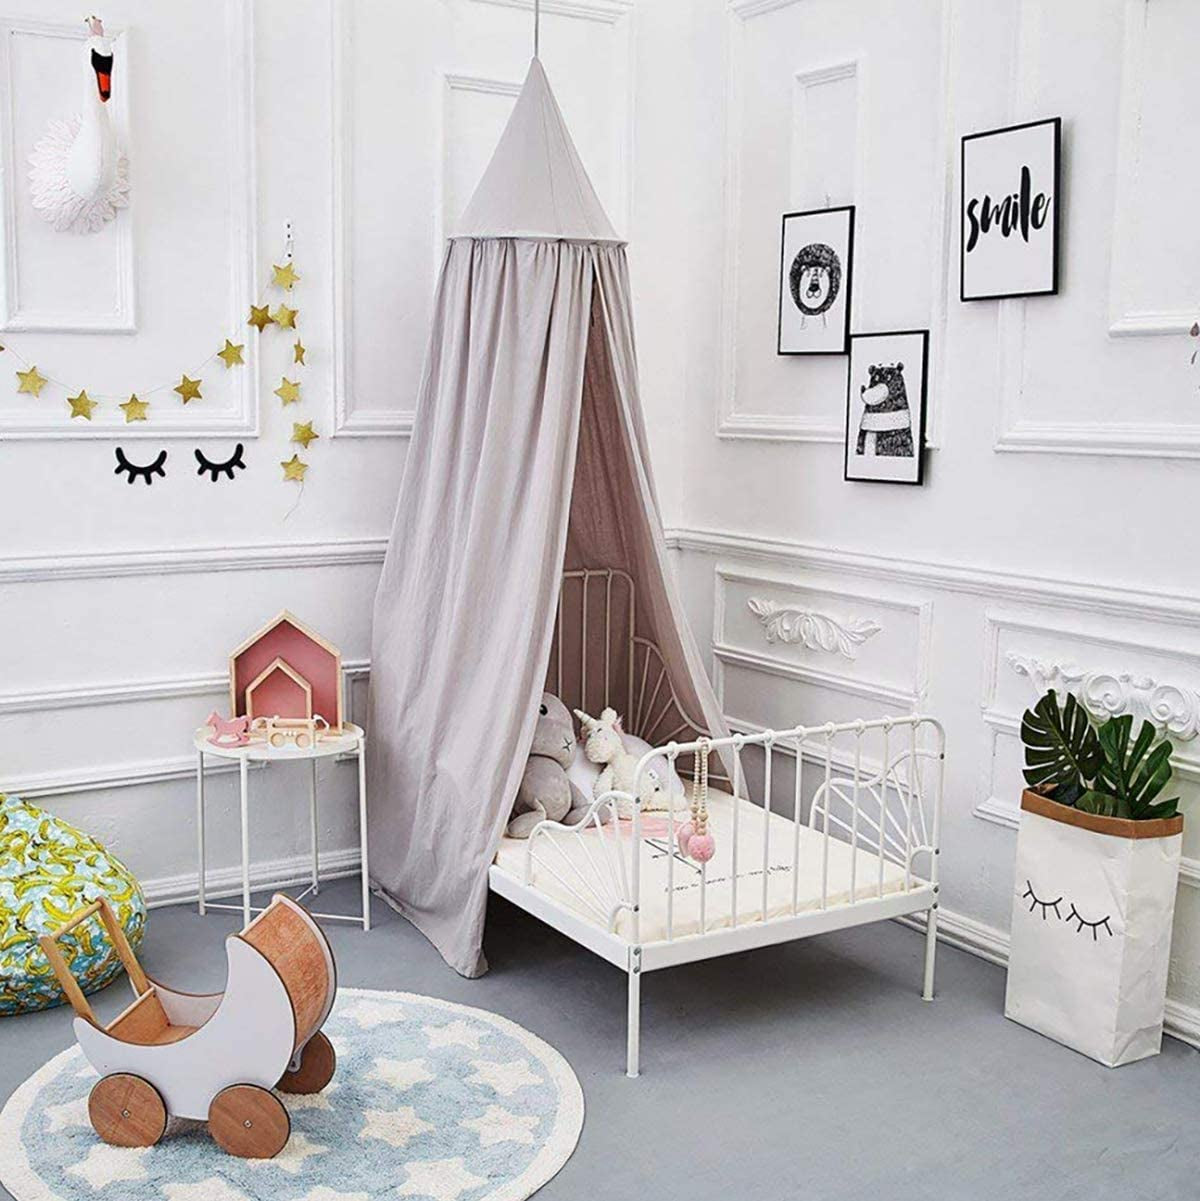 Dix-Rainbow Children Bed Canopy Grey round Dome, Nursery Room Decorations, Cotton Net Bed Canopies Kids Play Tent for Baby, Height 240Cm/94.5In